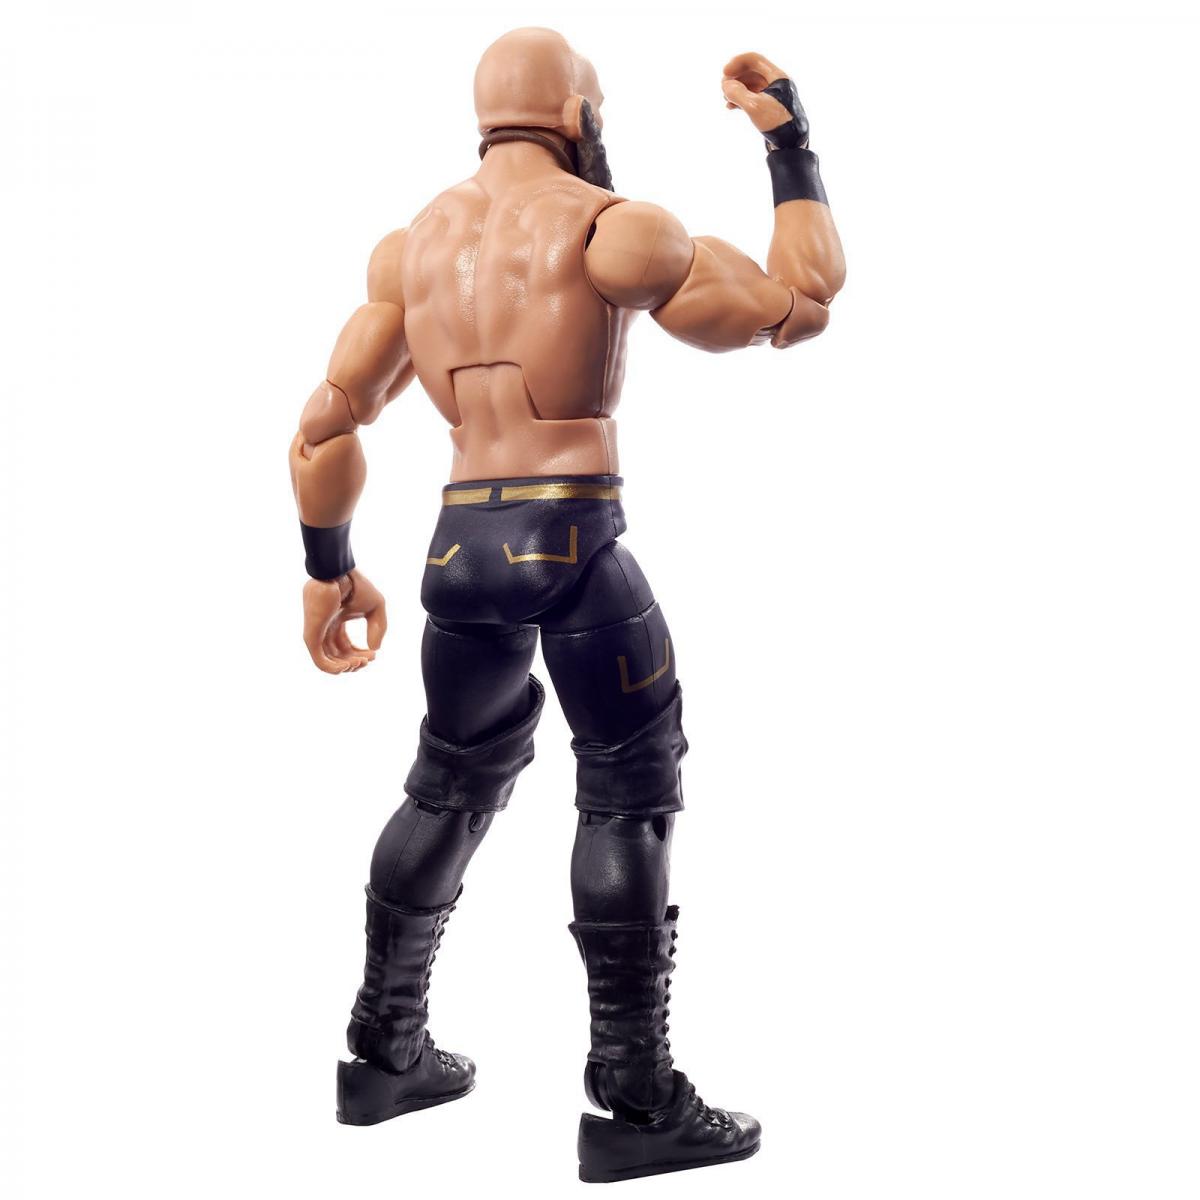 2021 WWE Mattel Elite Collection Ringside Exclusive Tomasso Ciampa [Blackheart]